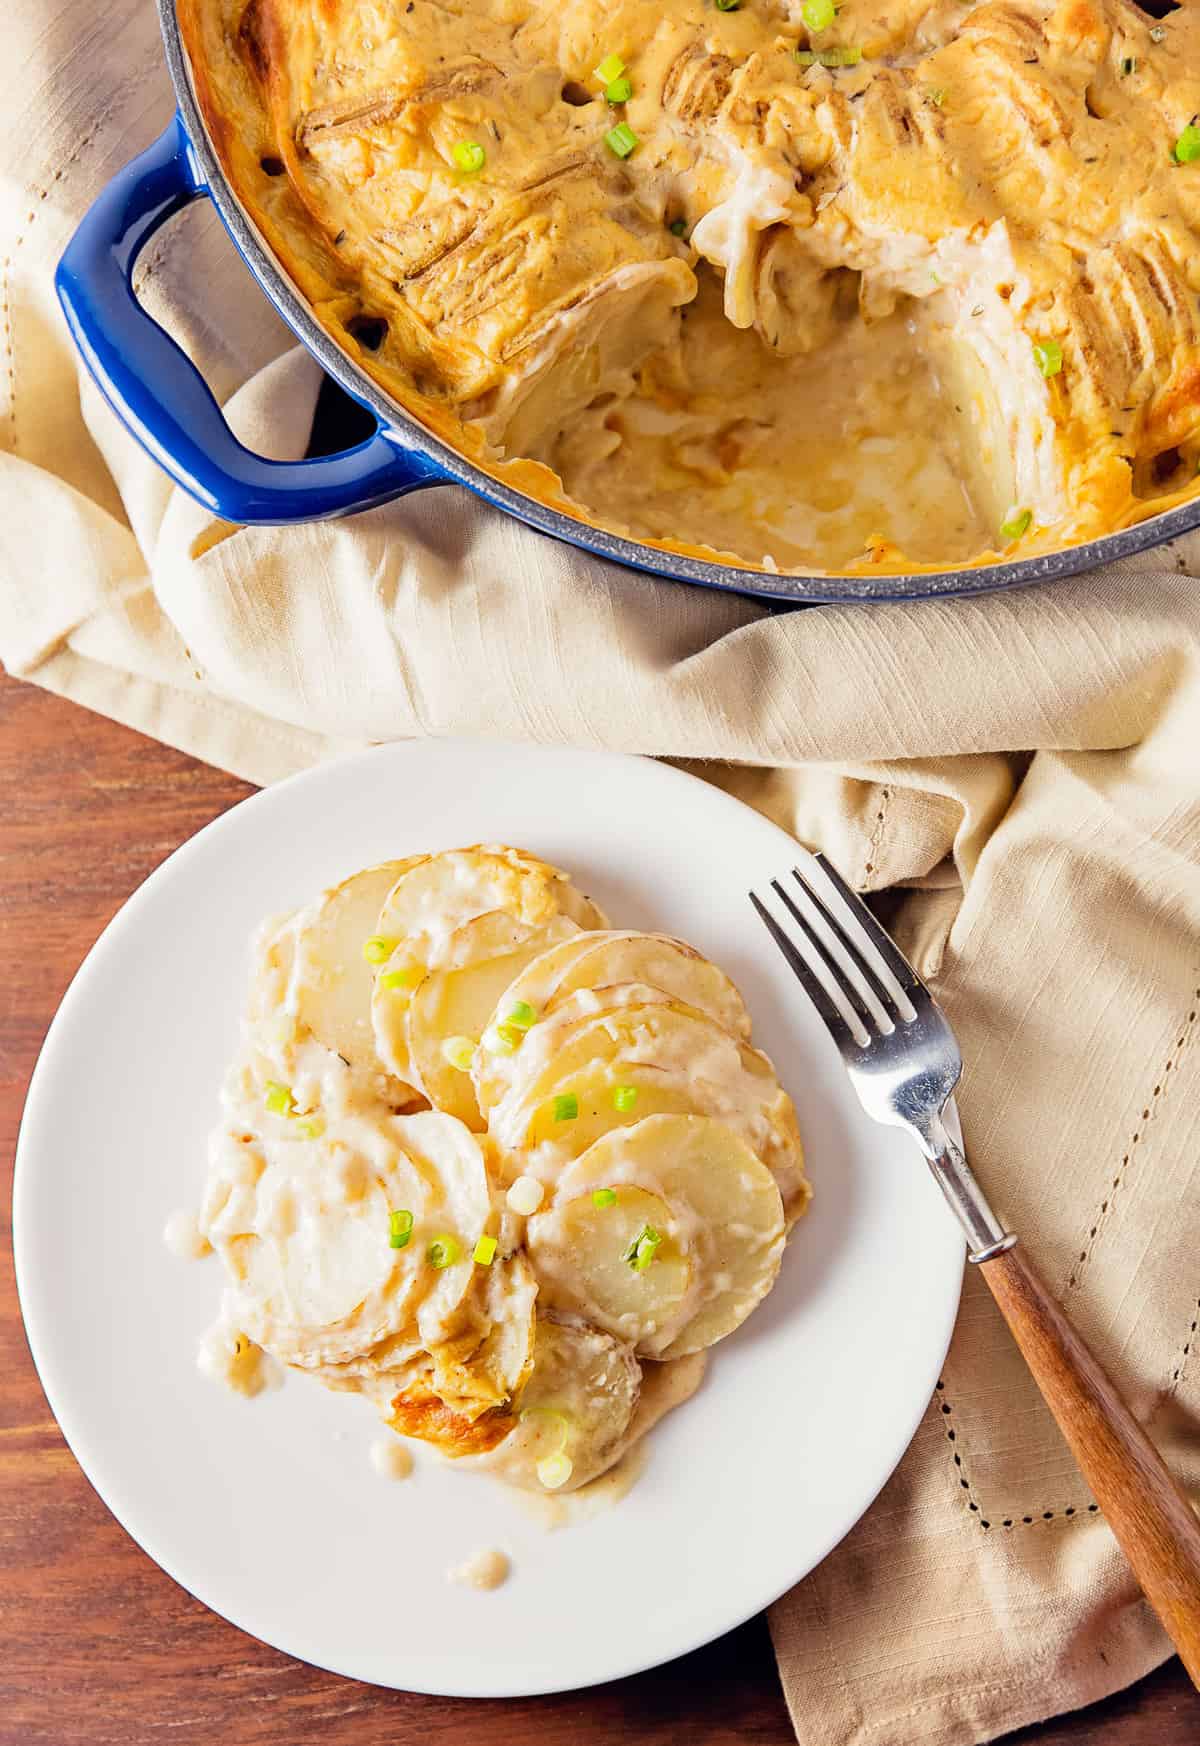 scalloped potatoes, potatoes, vegan, vegetarian, whole food plant based, gluten free, recipe, wfpb, healthy, oil free, no refined sugar, no oil, refined sugar free, dinner, side, side dish, dairy free, entertaining, dinner party